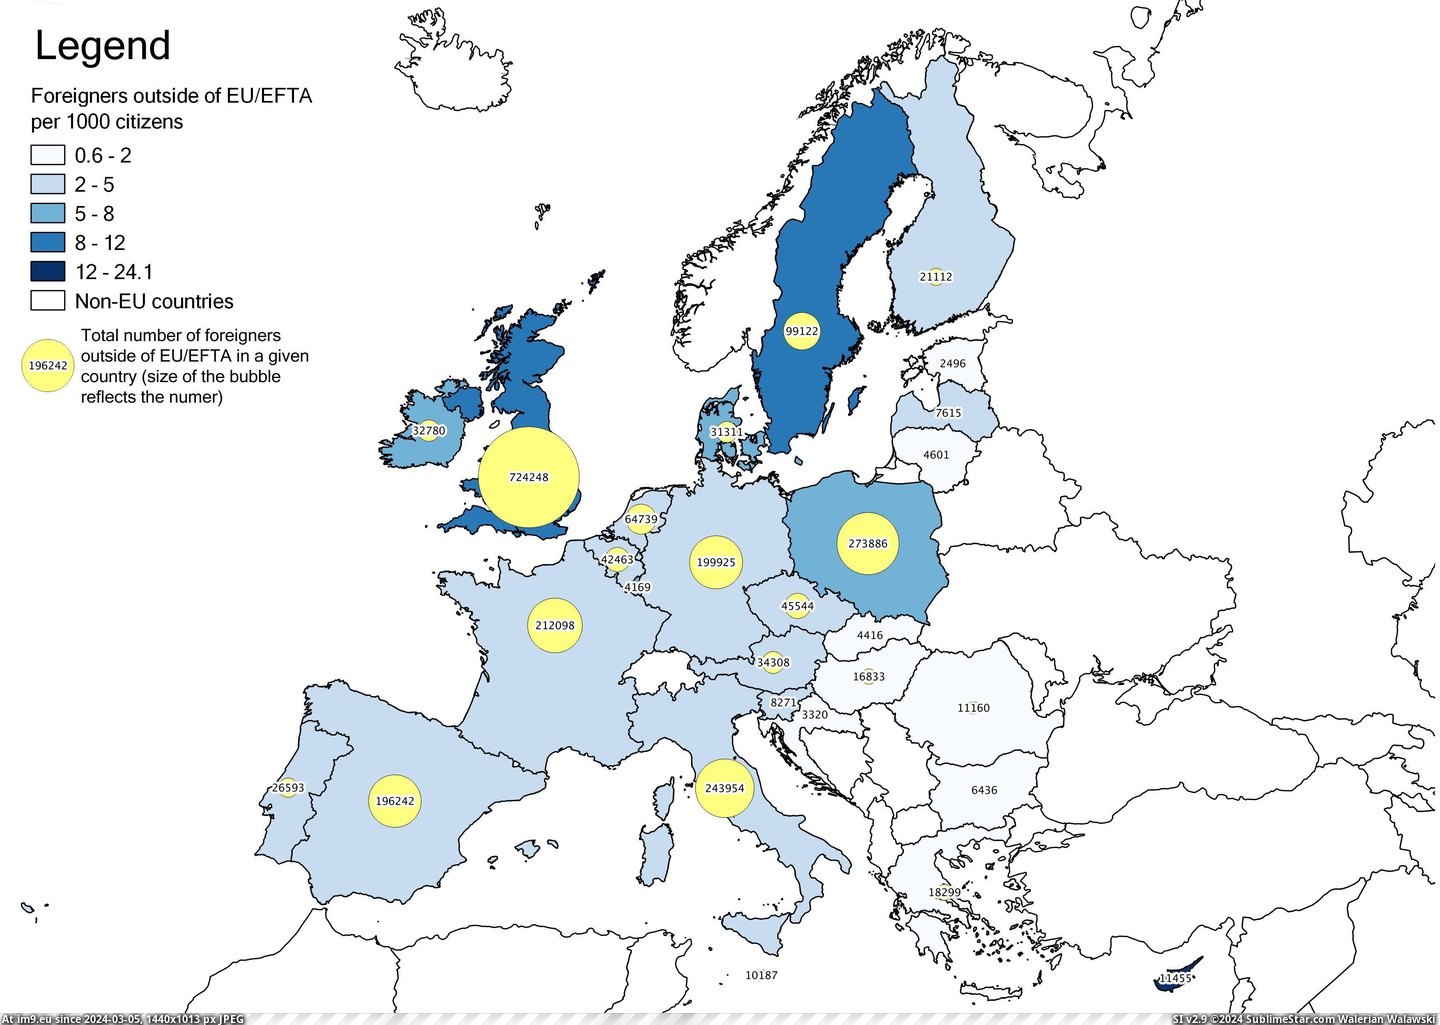 #Europe #Foreigners #Visas #Temporary #Efta [Mapporn] Temporary visas for foreigners outside of EU-EFTA in Europe in 2013 [OC] [3507×2480px] Pic. (Obraz z album My r/MAPS favs))